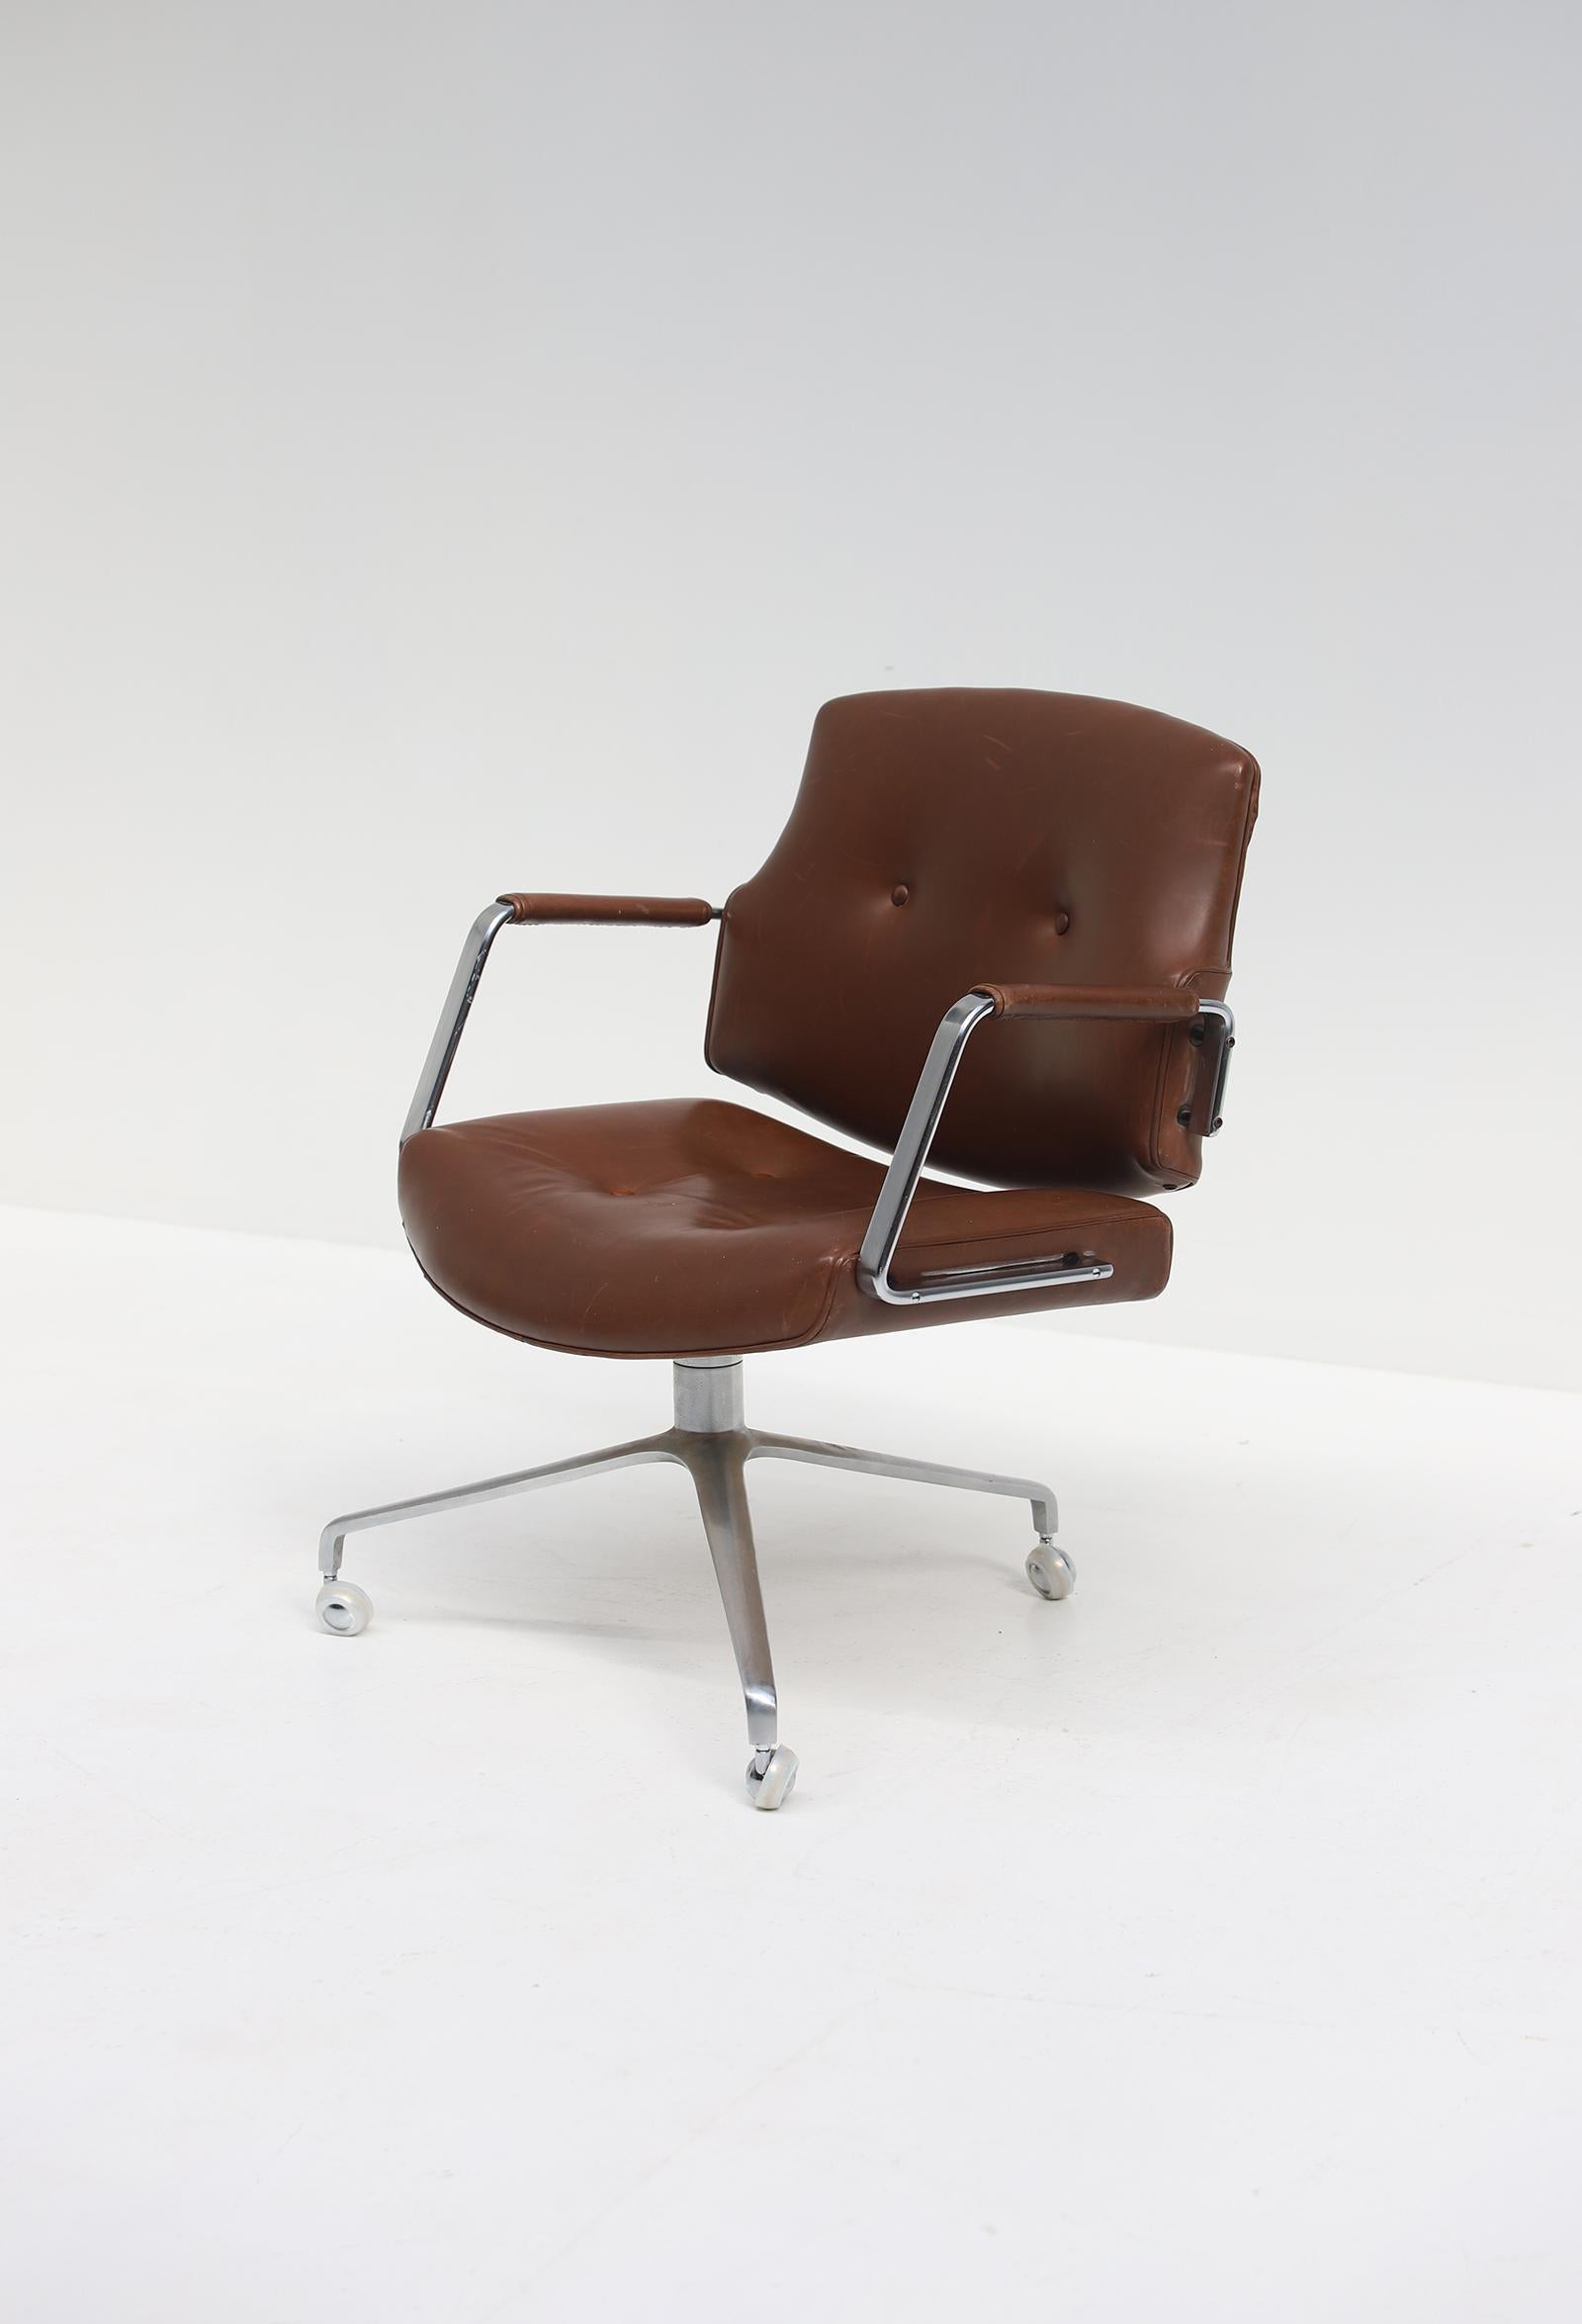 Fk84 Chocolatebrown Leather Office Chair by Preben Fabricius and Jorgen Kastholm 1